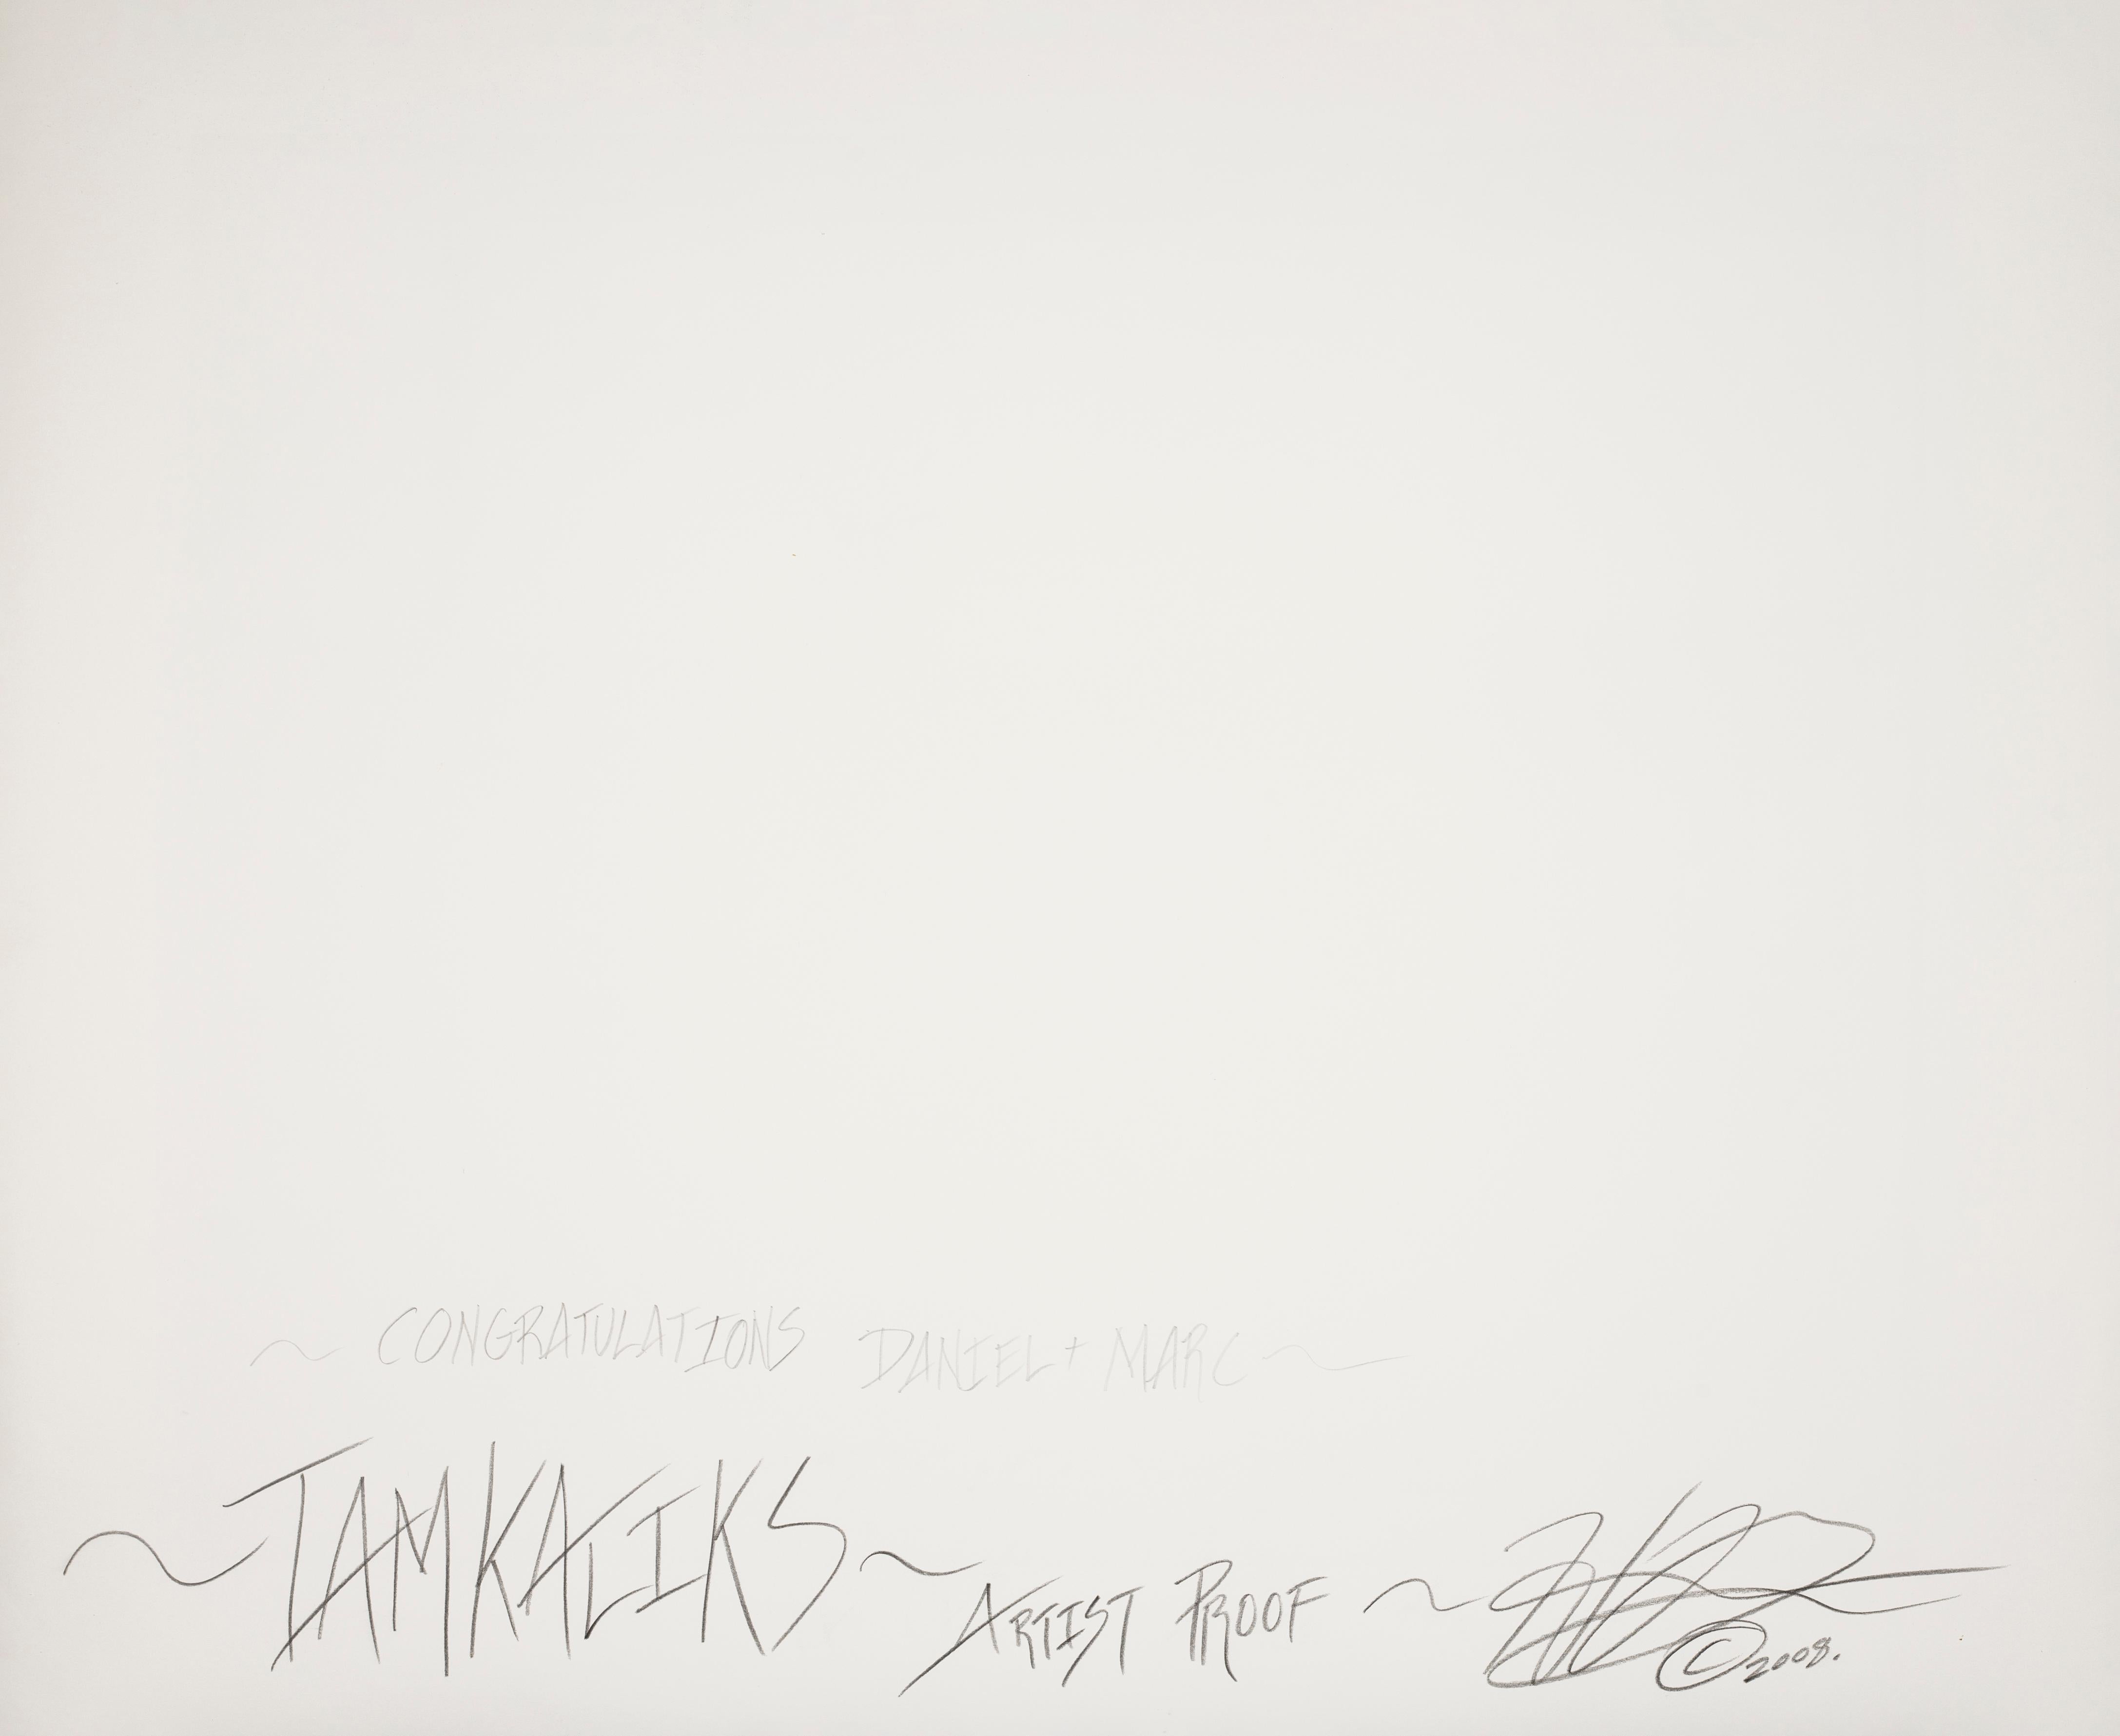 Hunter Barnes has documented his stay when joining the Tamkaliks Powwow in Wallowa, Oregon.
This work is an artist proof, archival silver gelatin, handprinted by the artist  and signed on verso. 
Directly acquired from the artist. 

The framing is